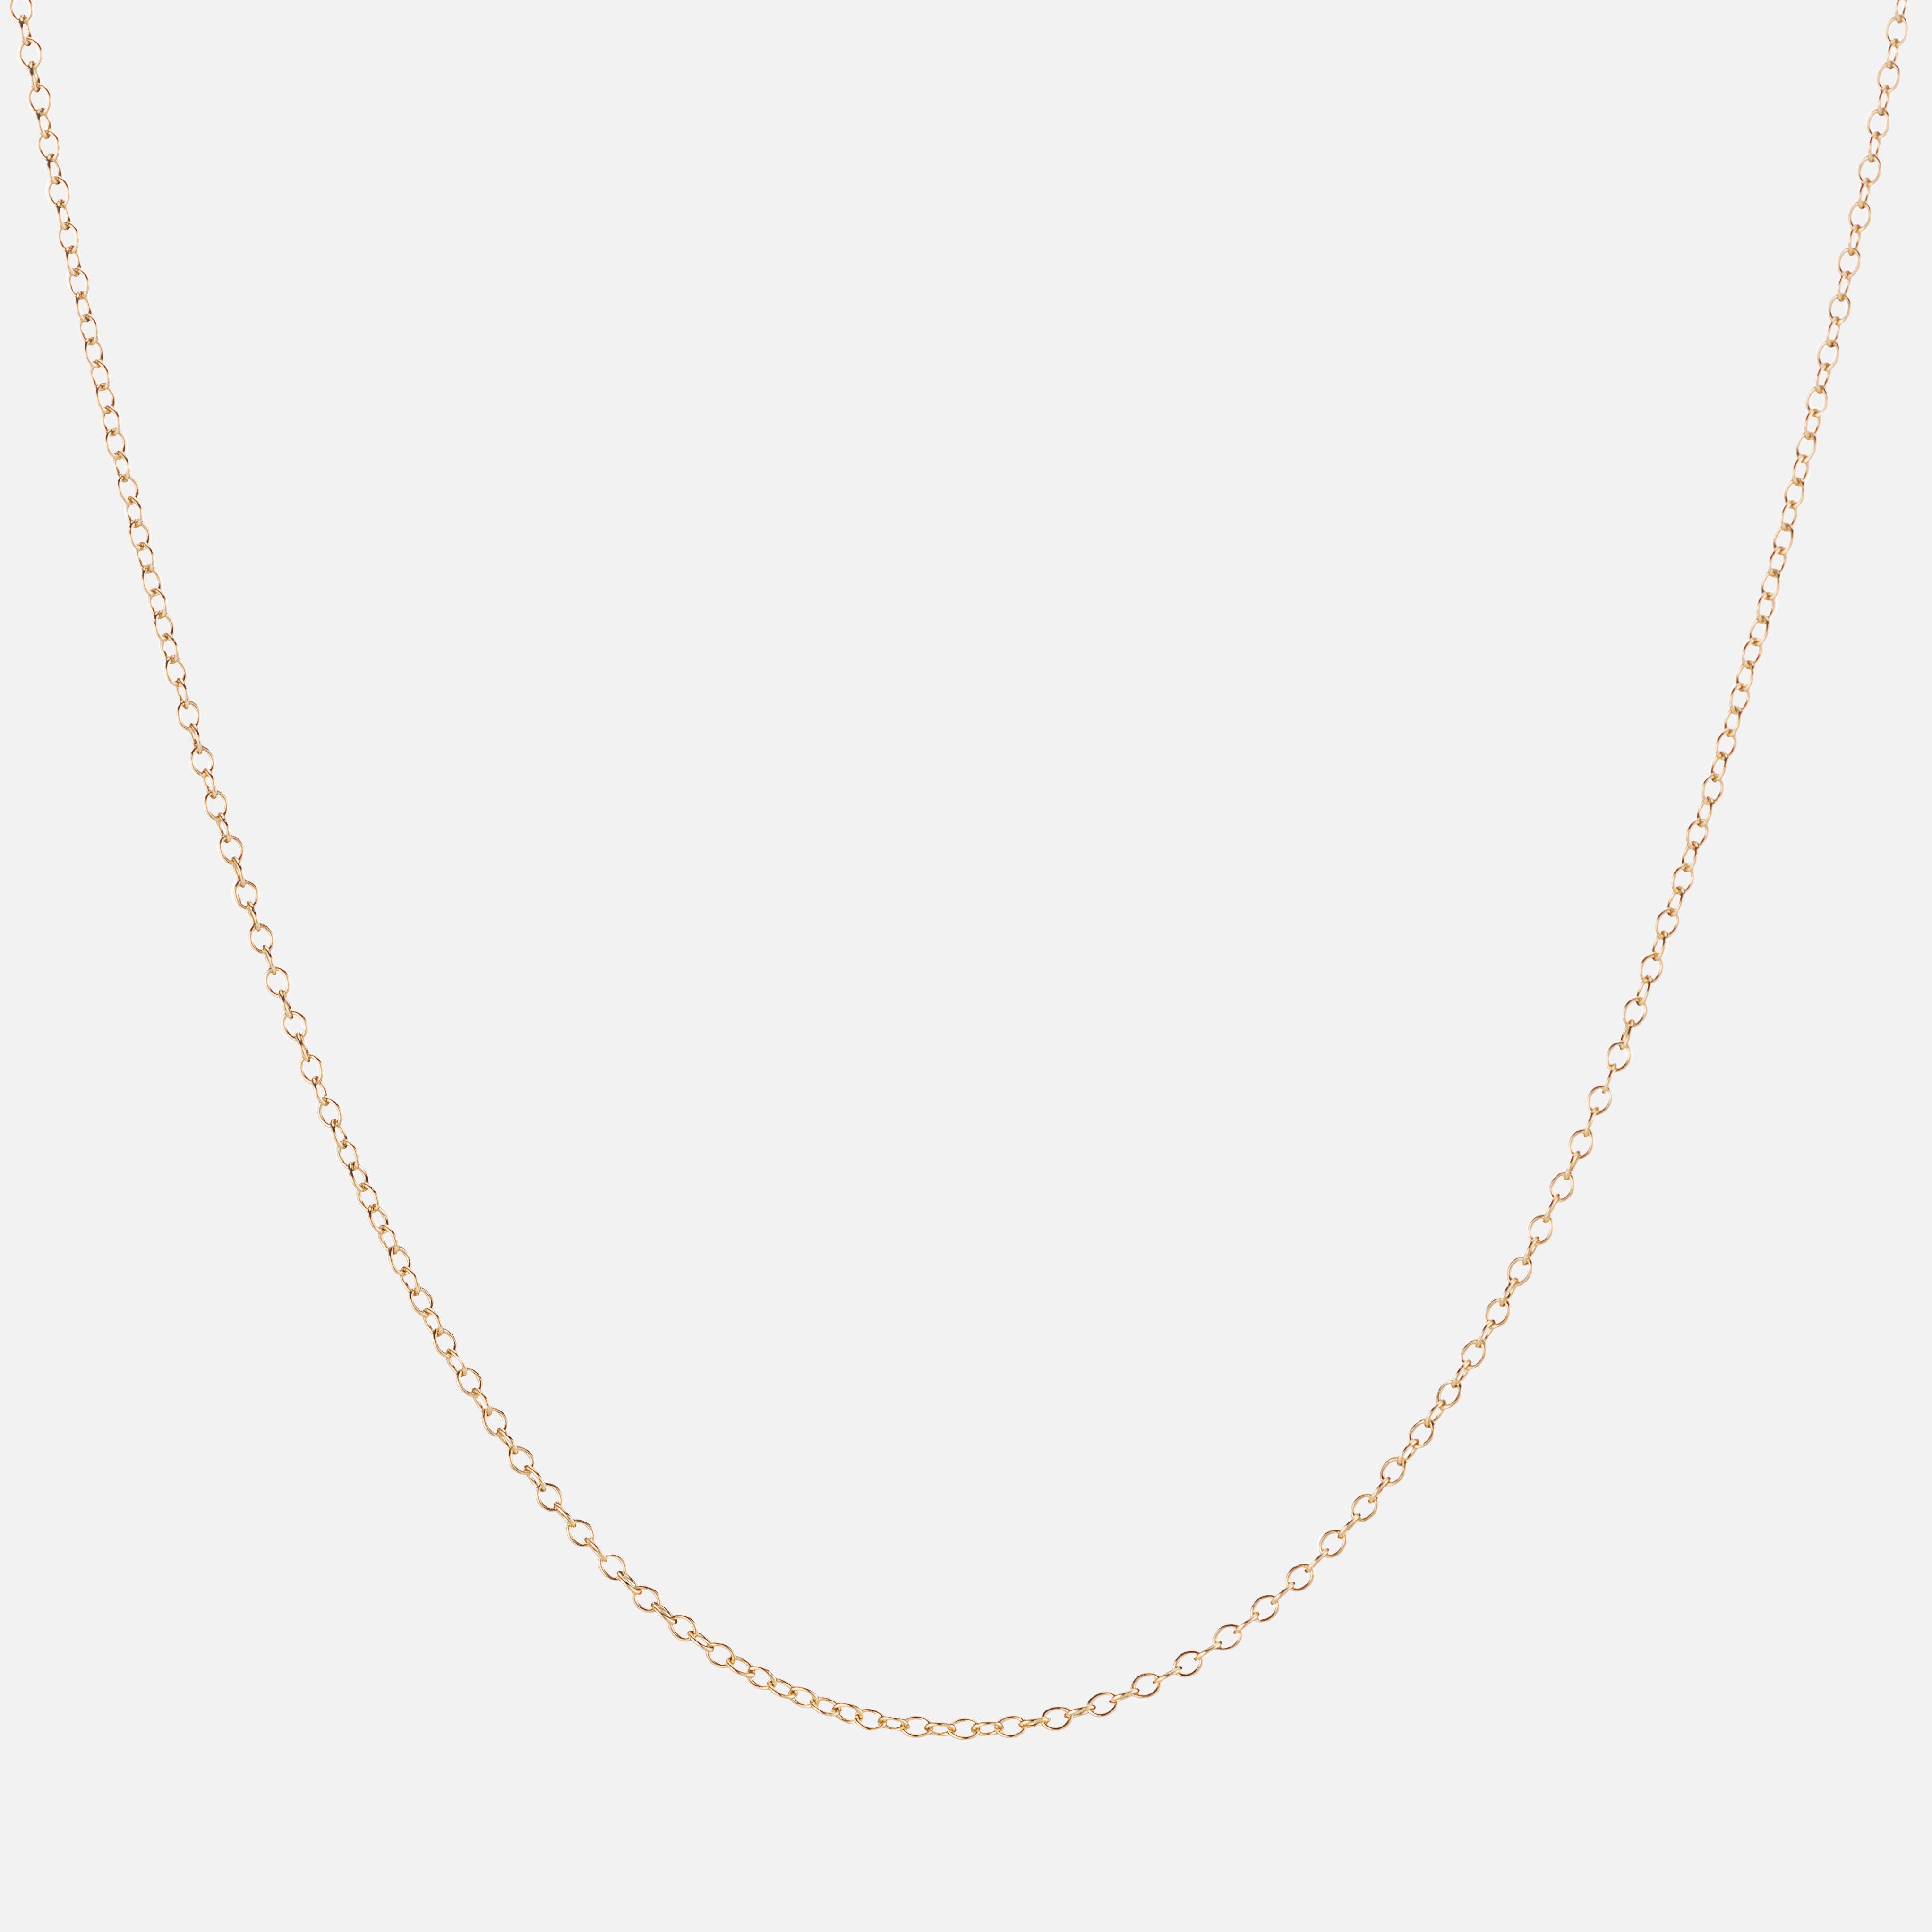 Ariel Gordon Jewelry 1mm Cable Chain - At Present Jewelry